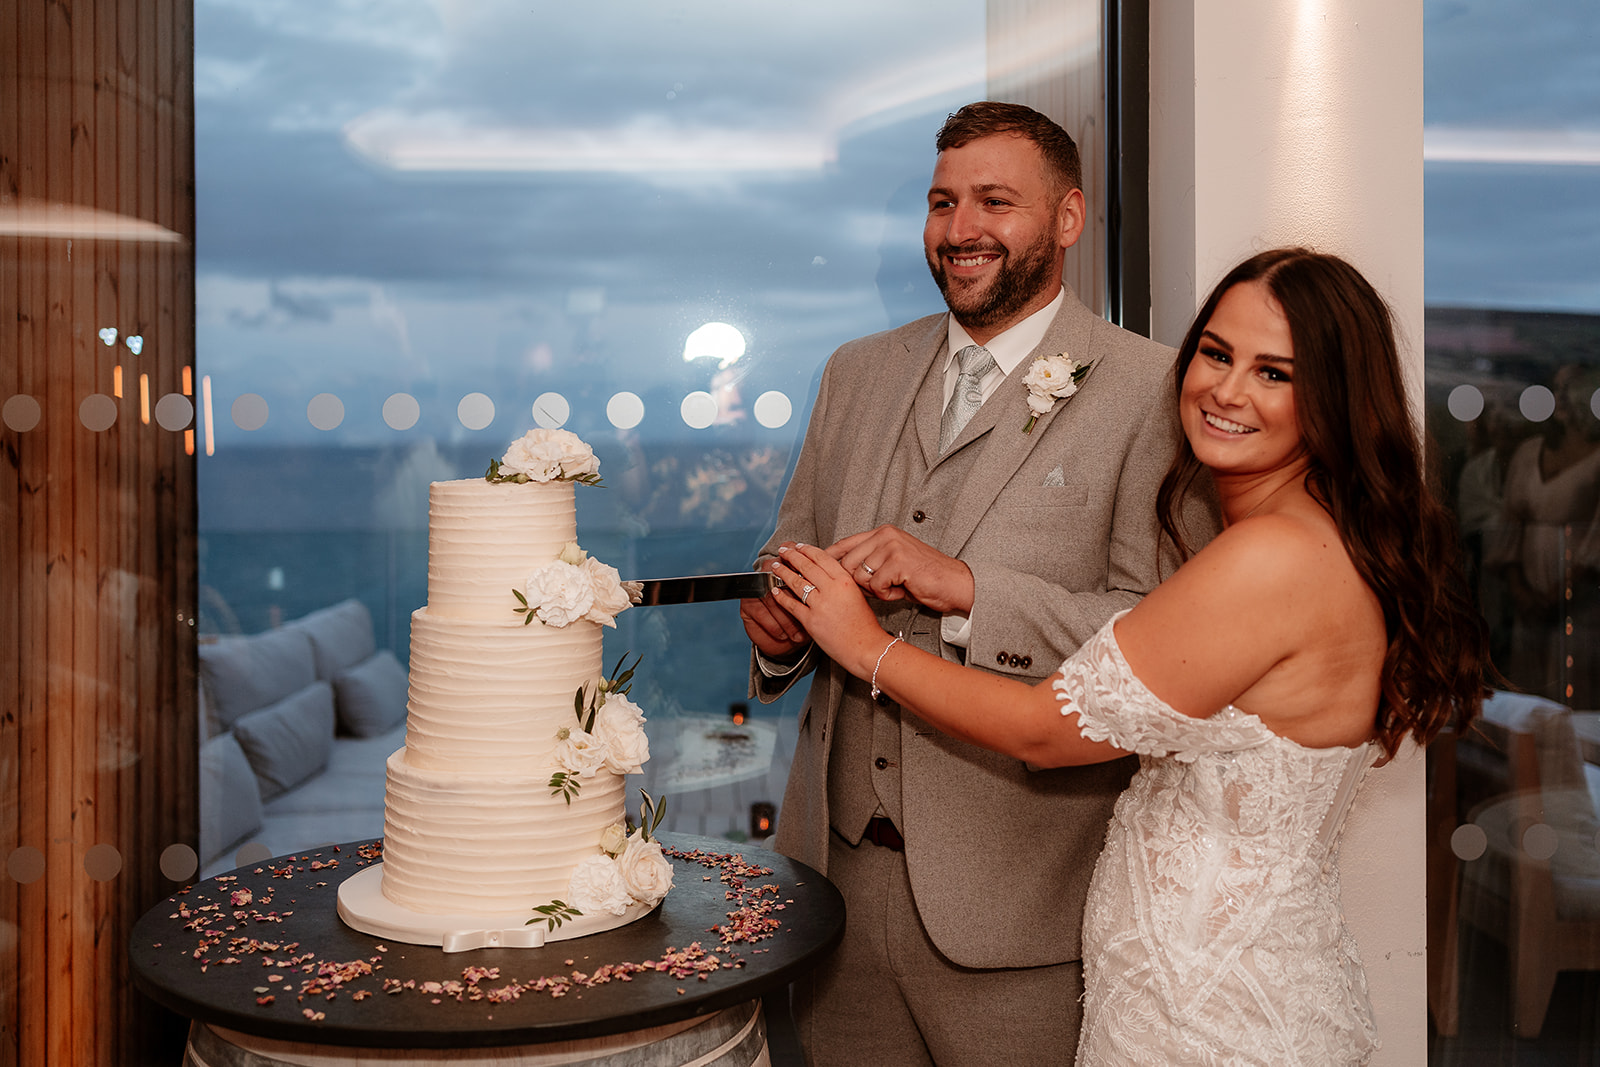 Bride and groom cut their cake at their Sandy Cove Hotel wedding